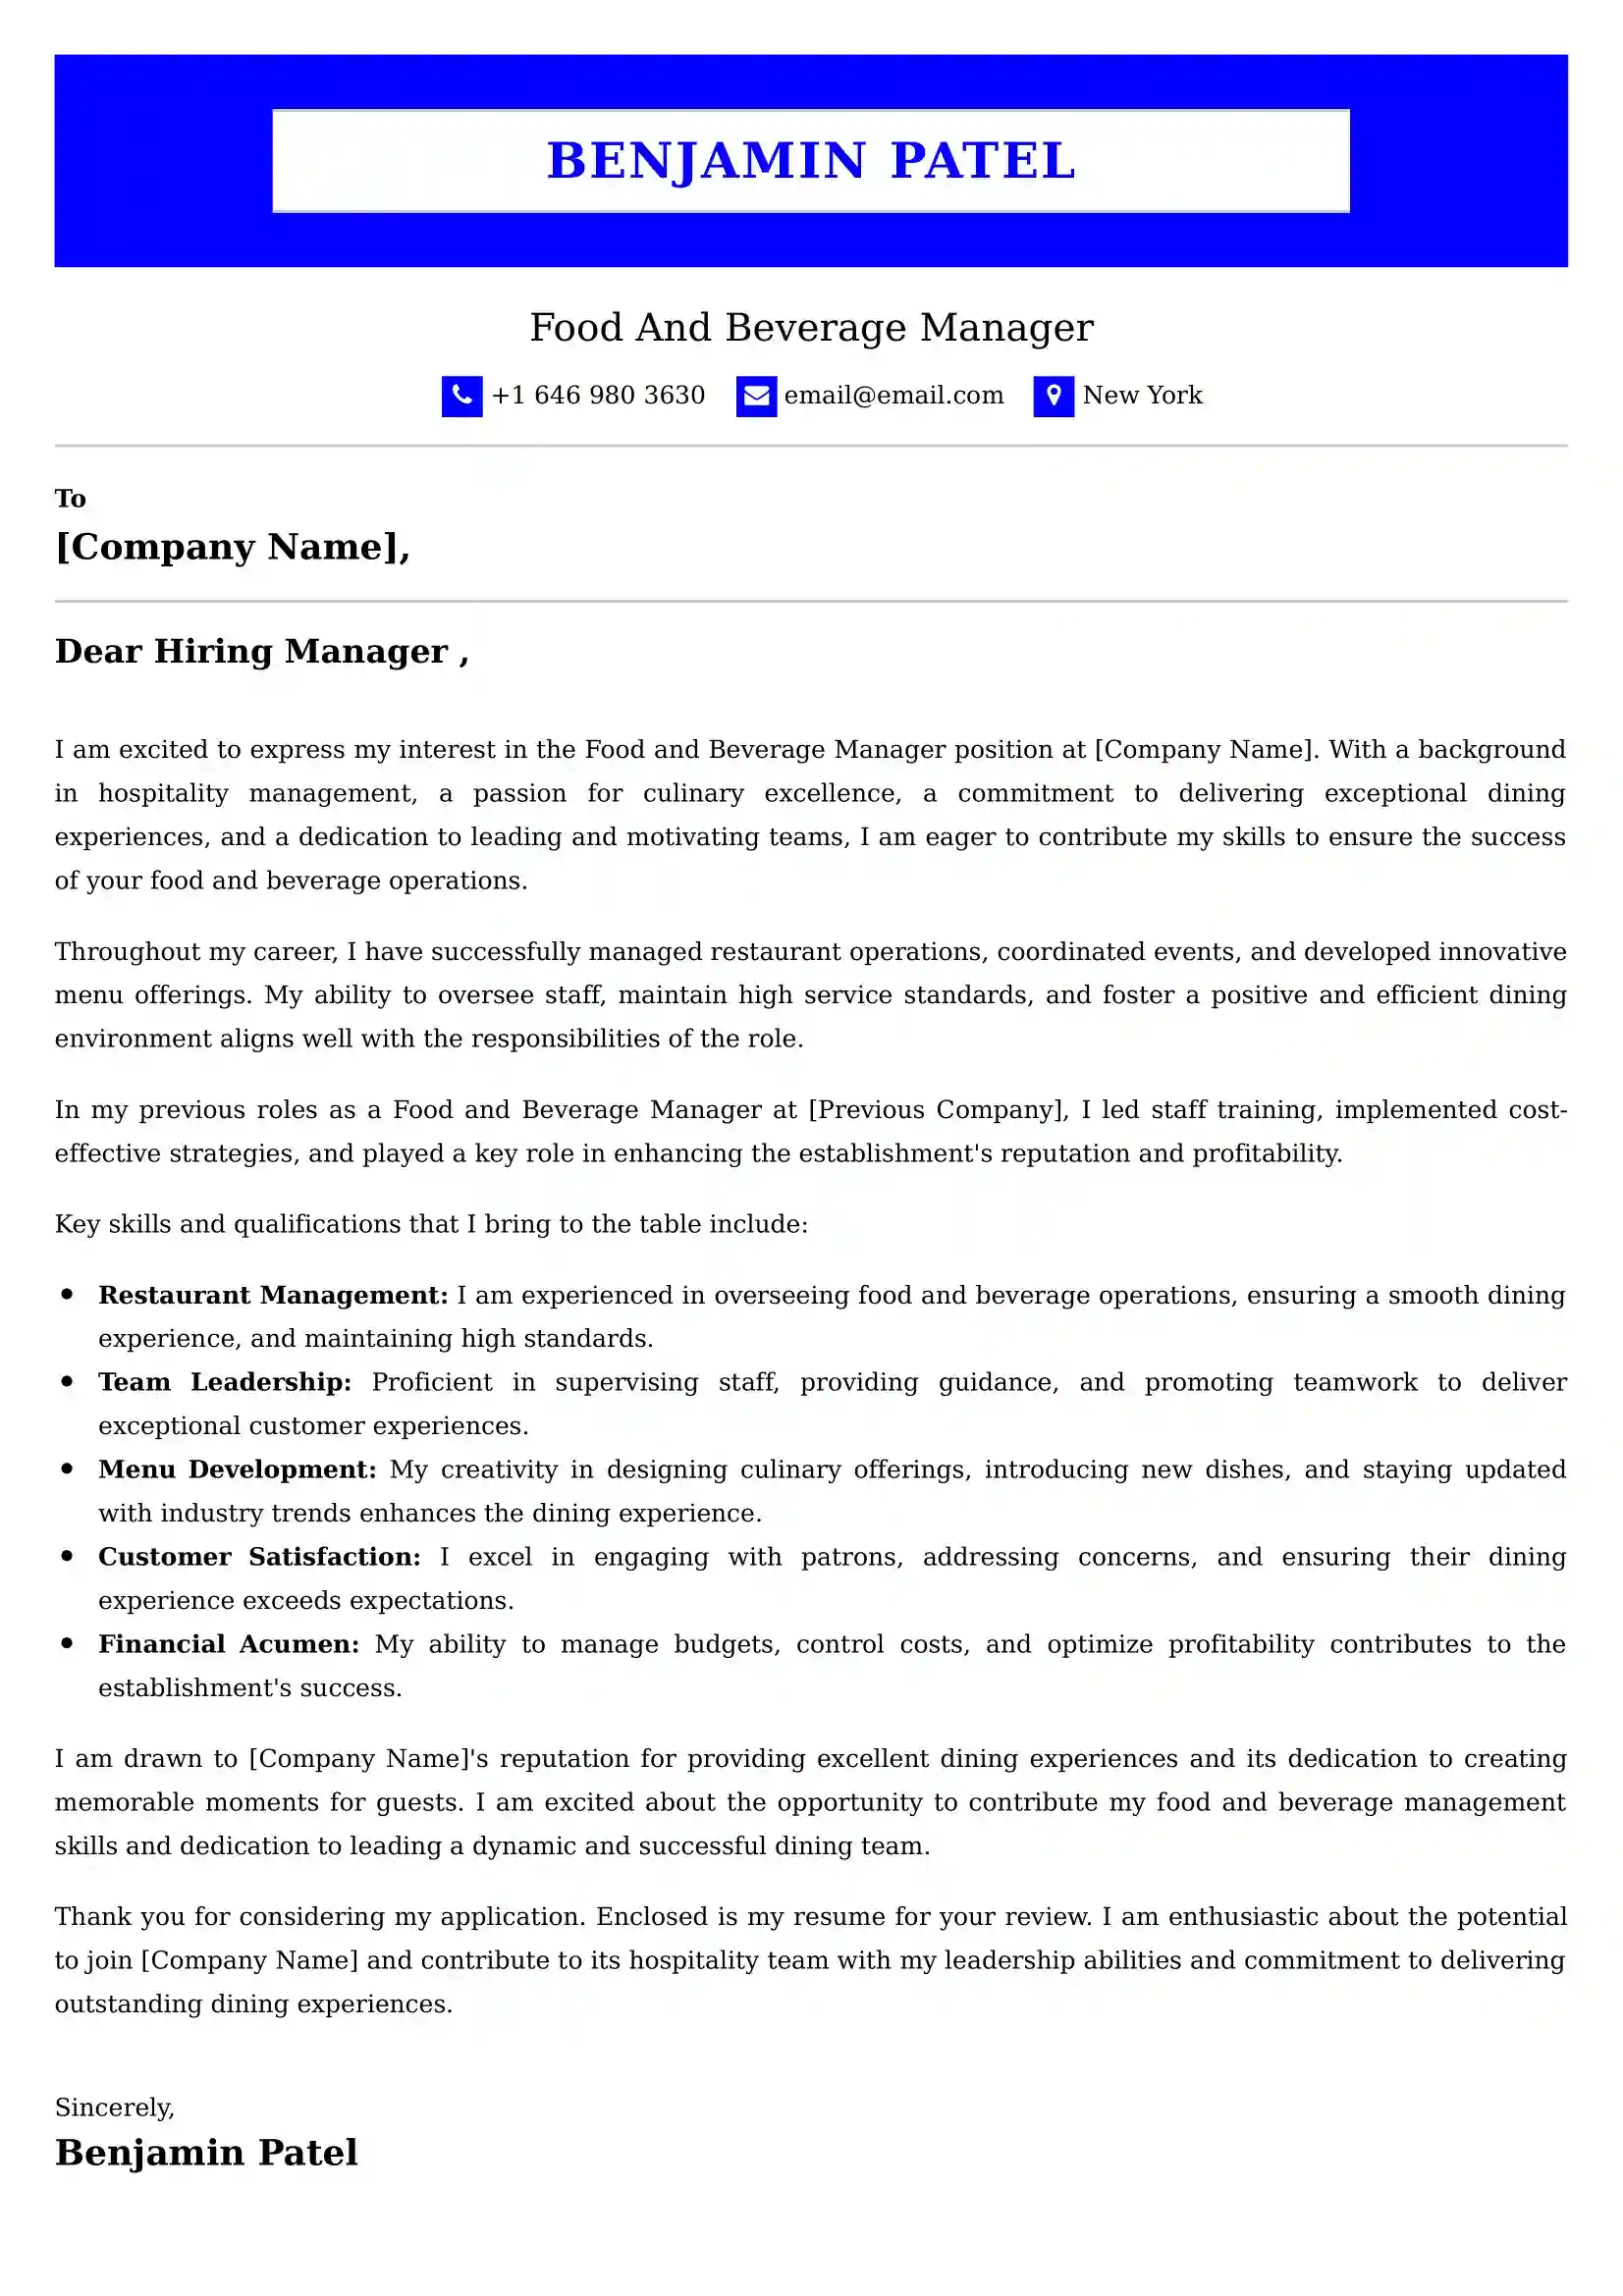 Food And Beverage Manager Cover Letter Examples Australia